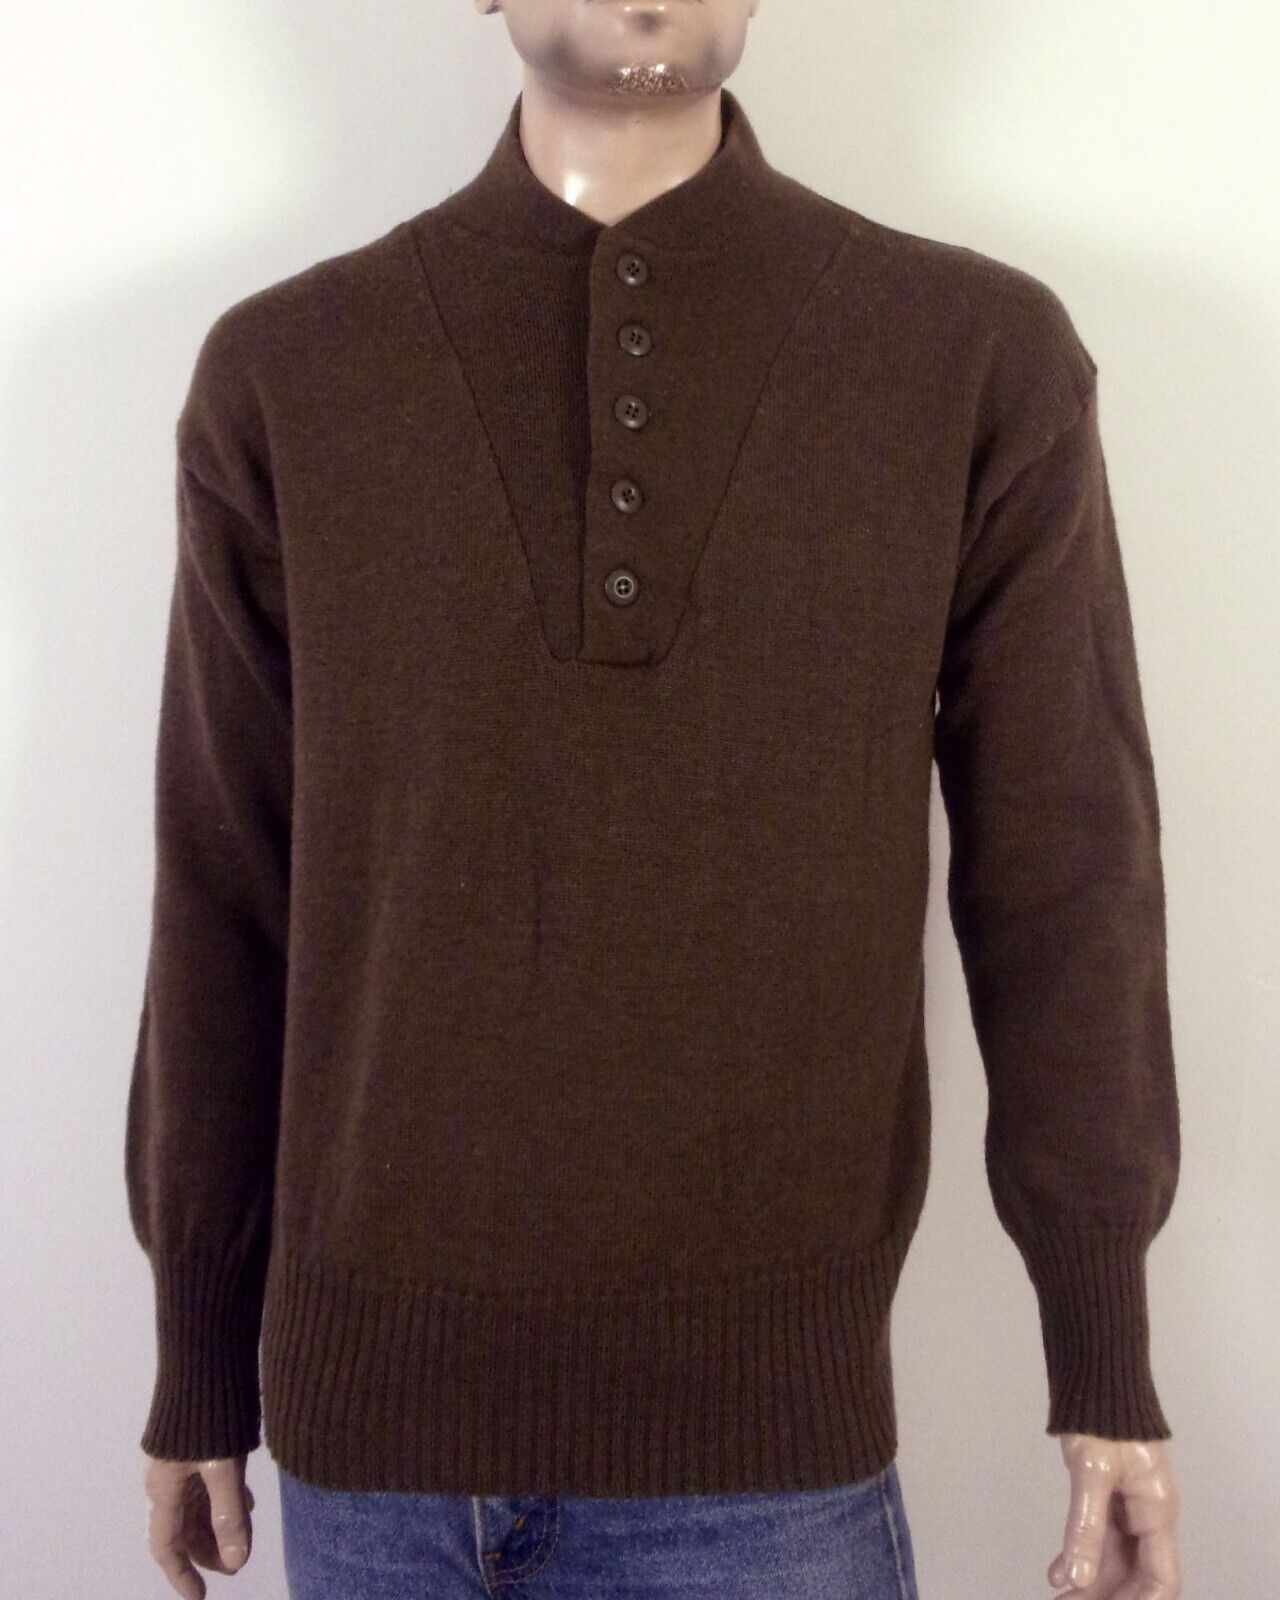 vintage 80s 90s US Army Military Brown Wool 5 Button Sweater High Neck M